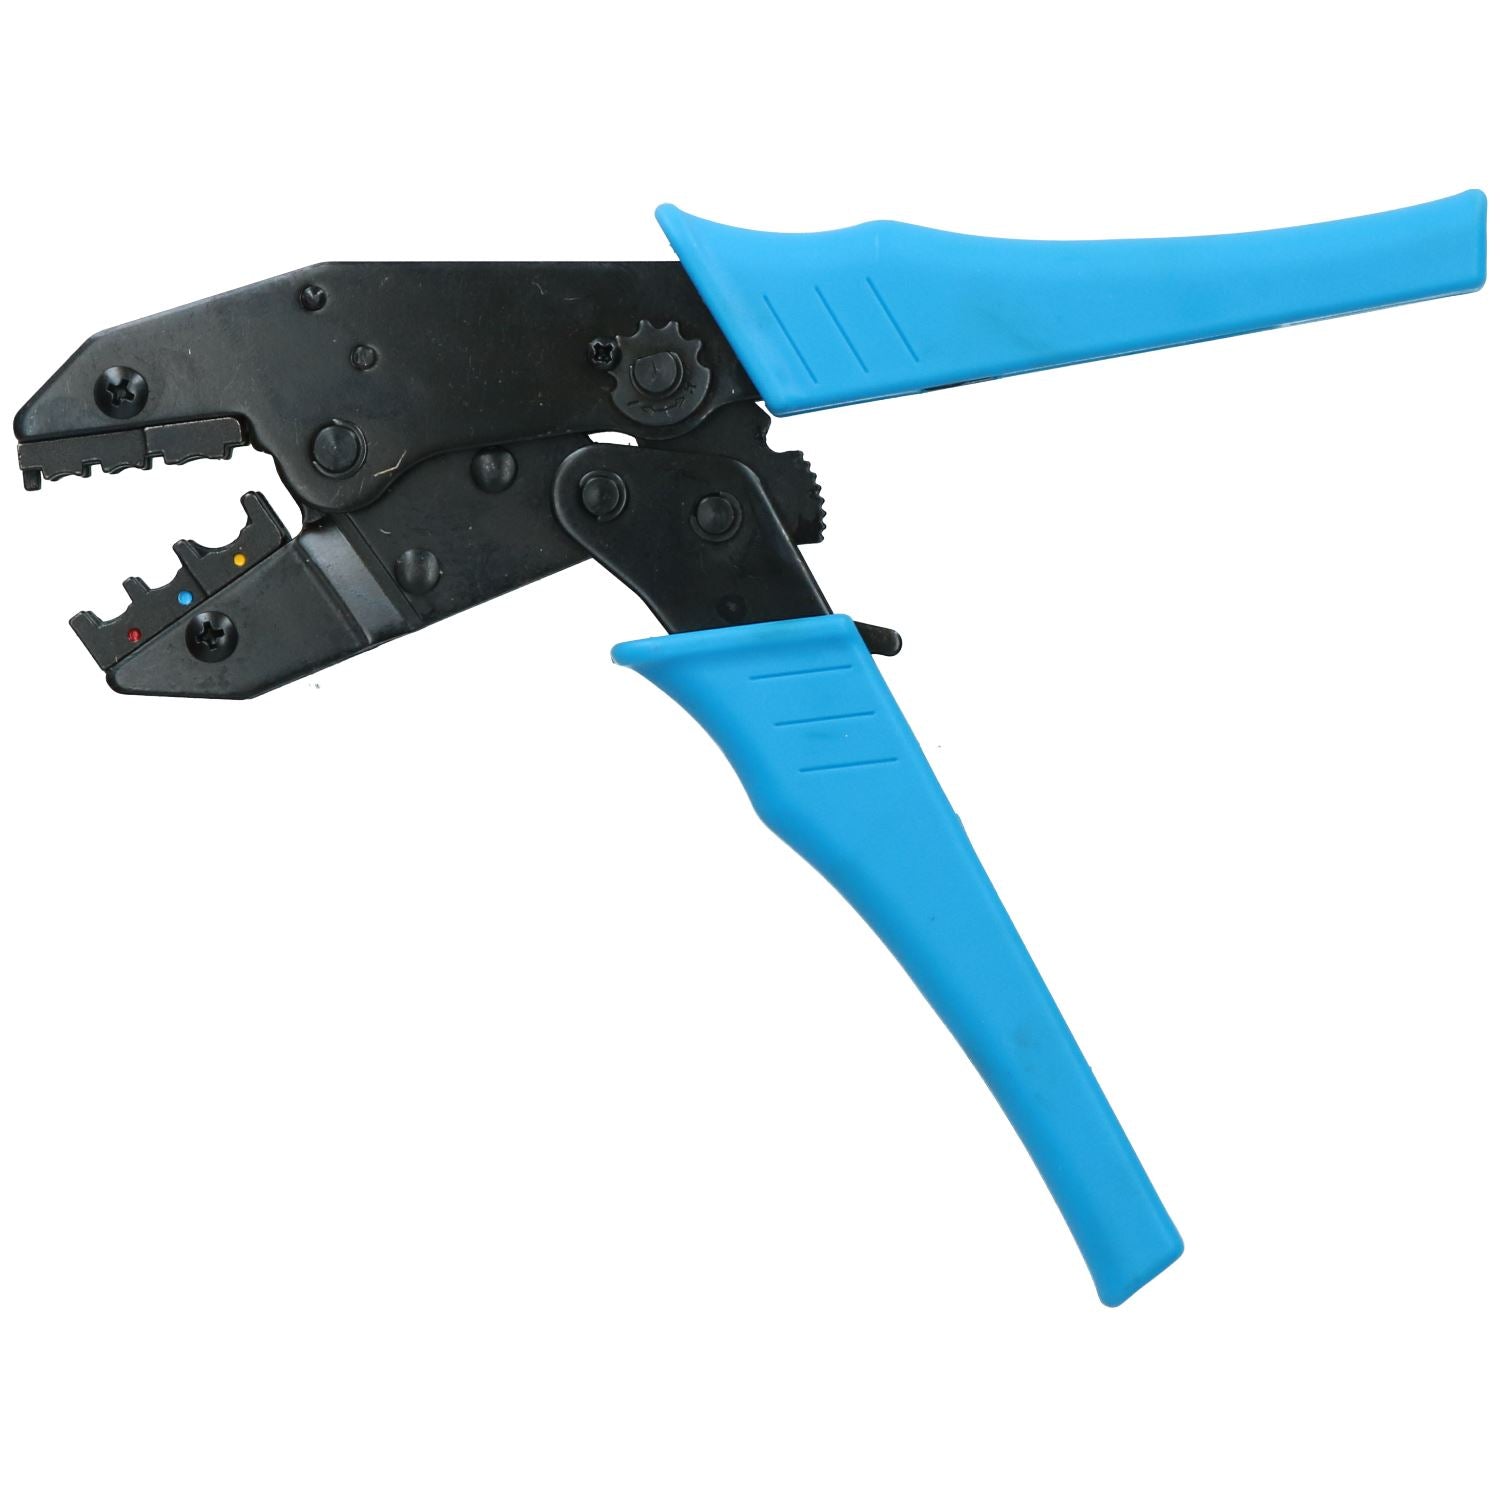 Ratchet Crimping Crimp Pliers for Insulated Electrical Terminals 0.5mm - 6mm